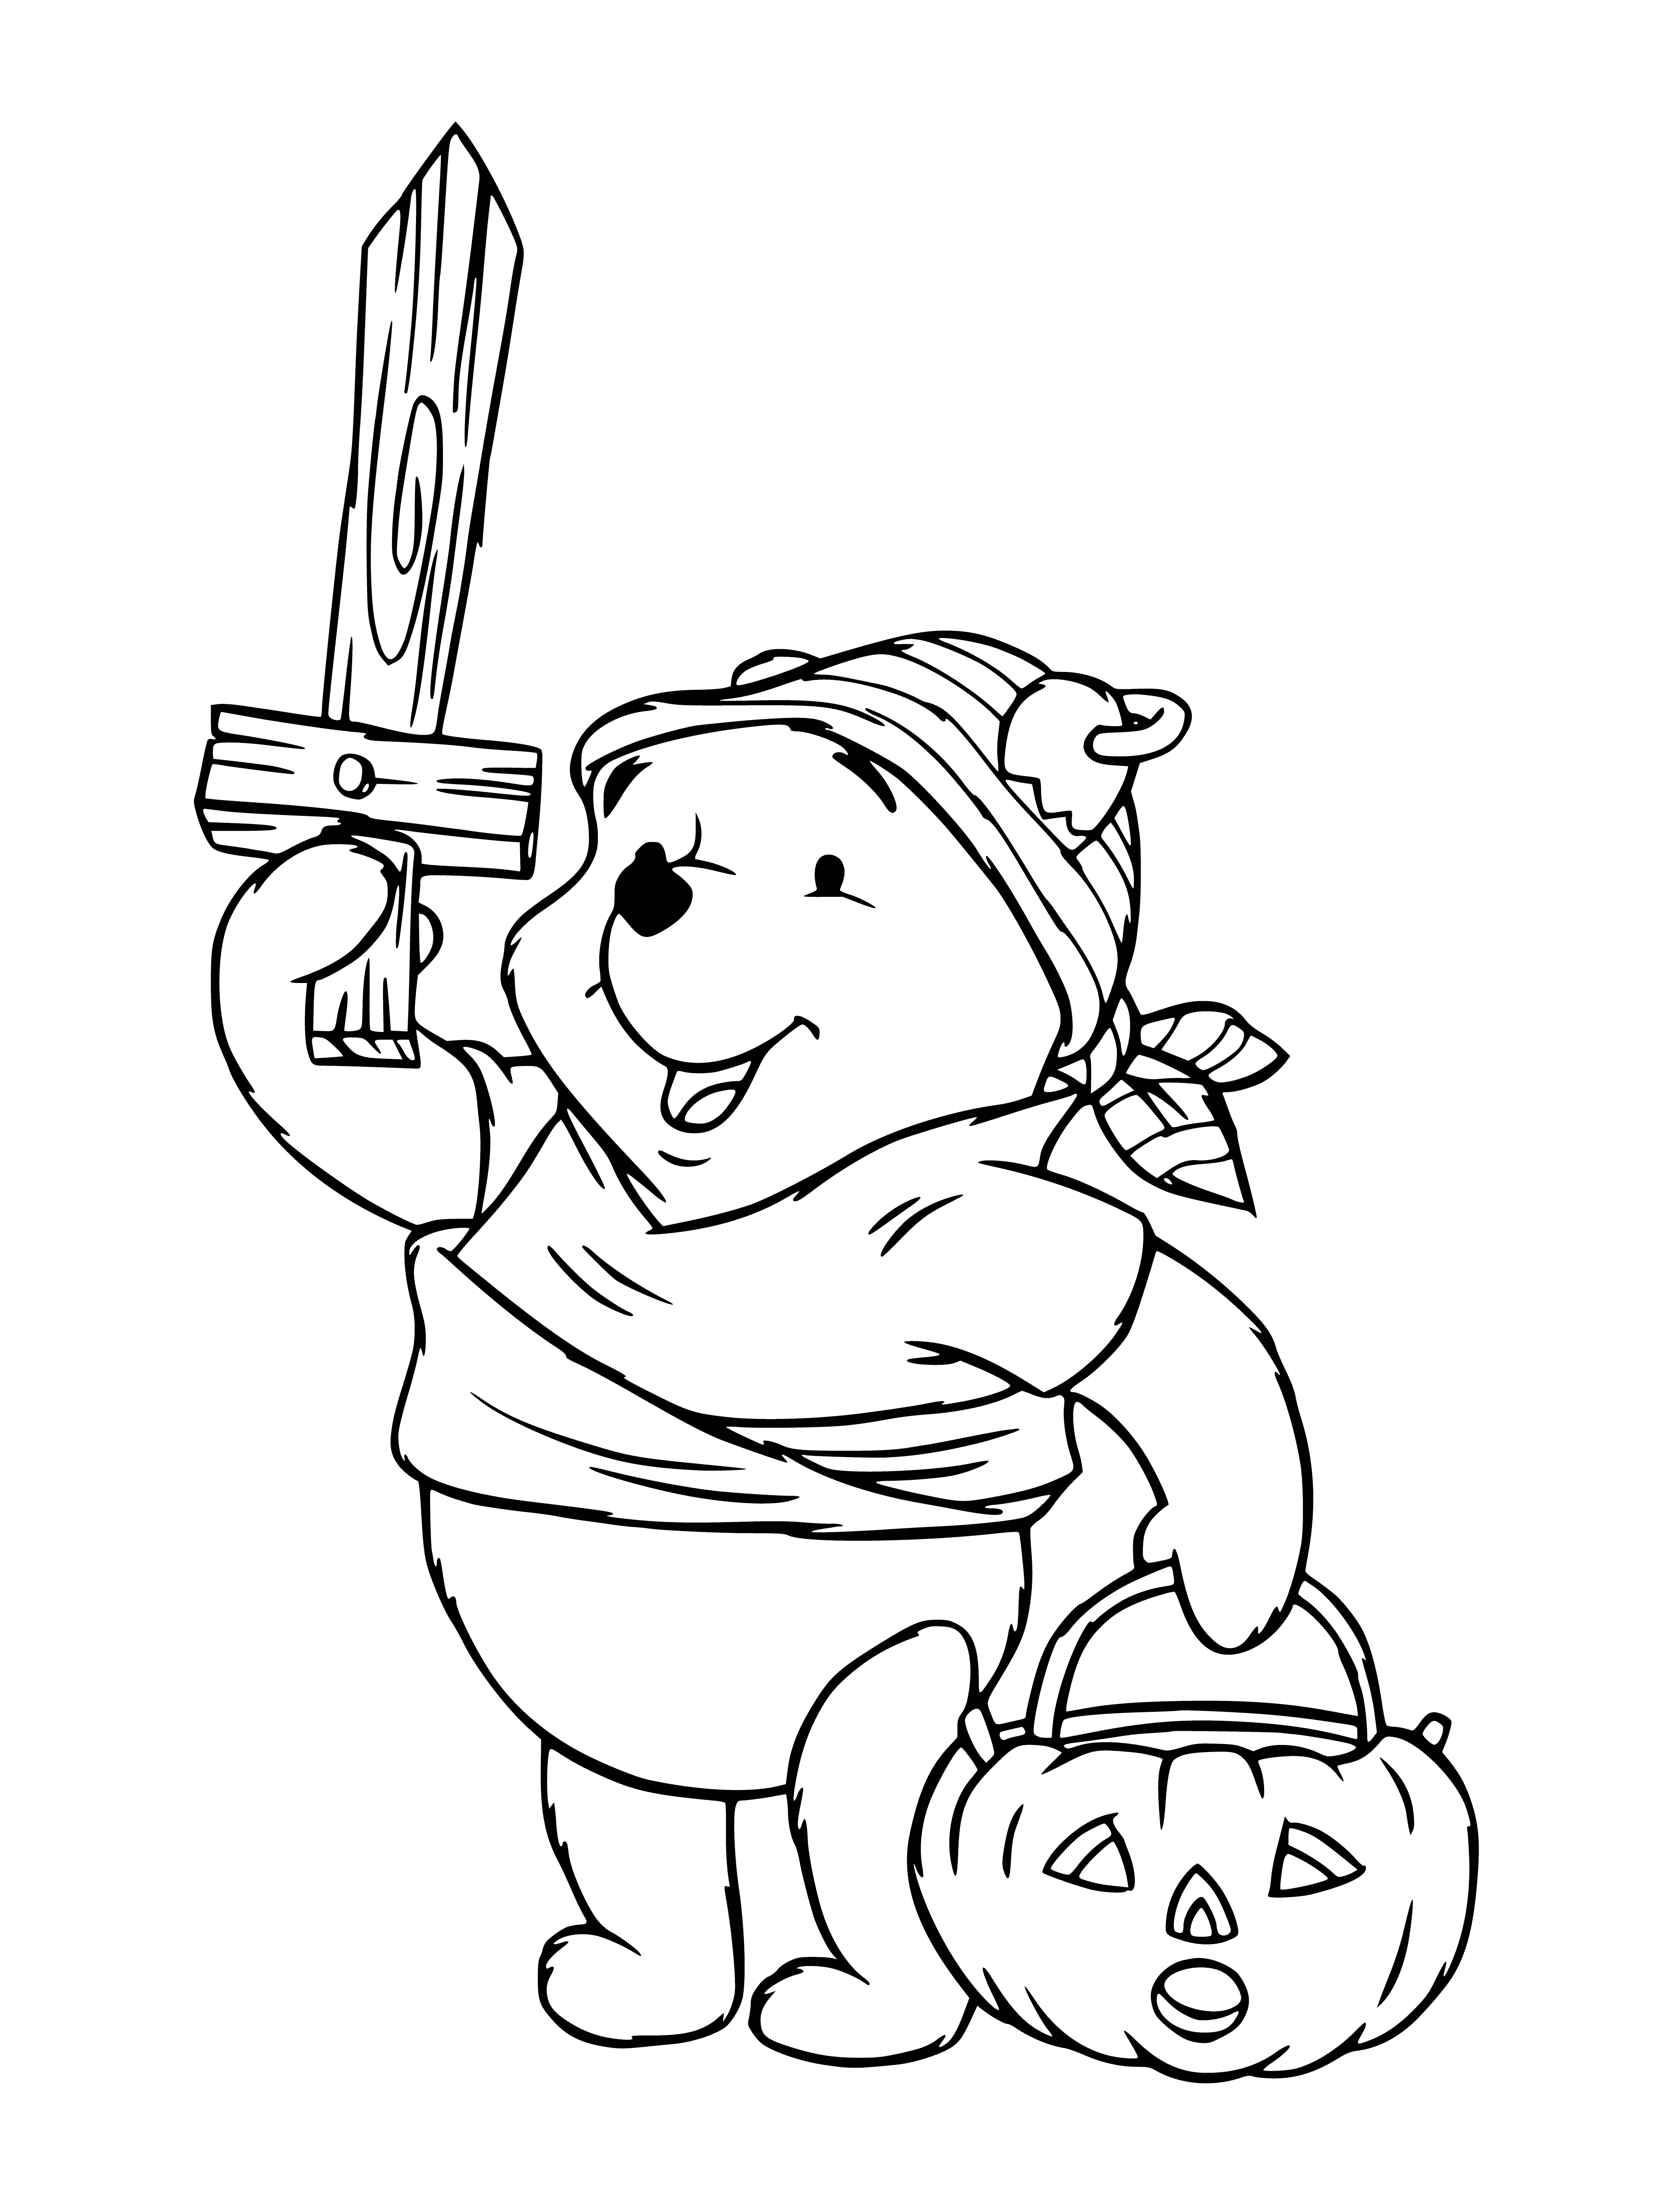 coloring page: Winnie the Pooh dressed as a bunny for Halloween, sitting in front of a carved pumpkin w/ a basket of candy.